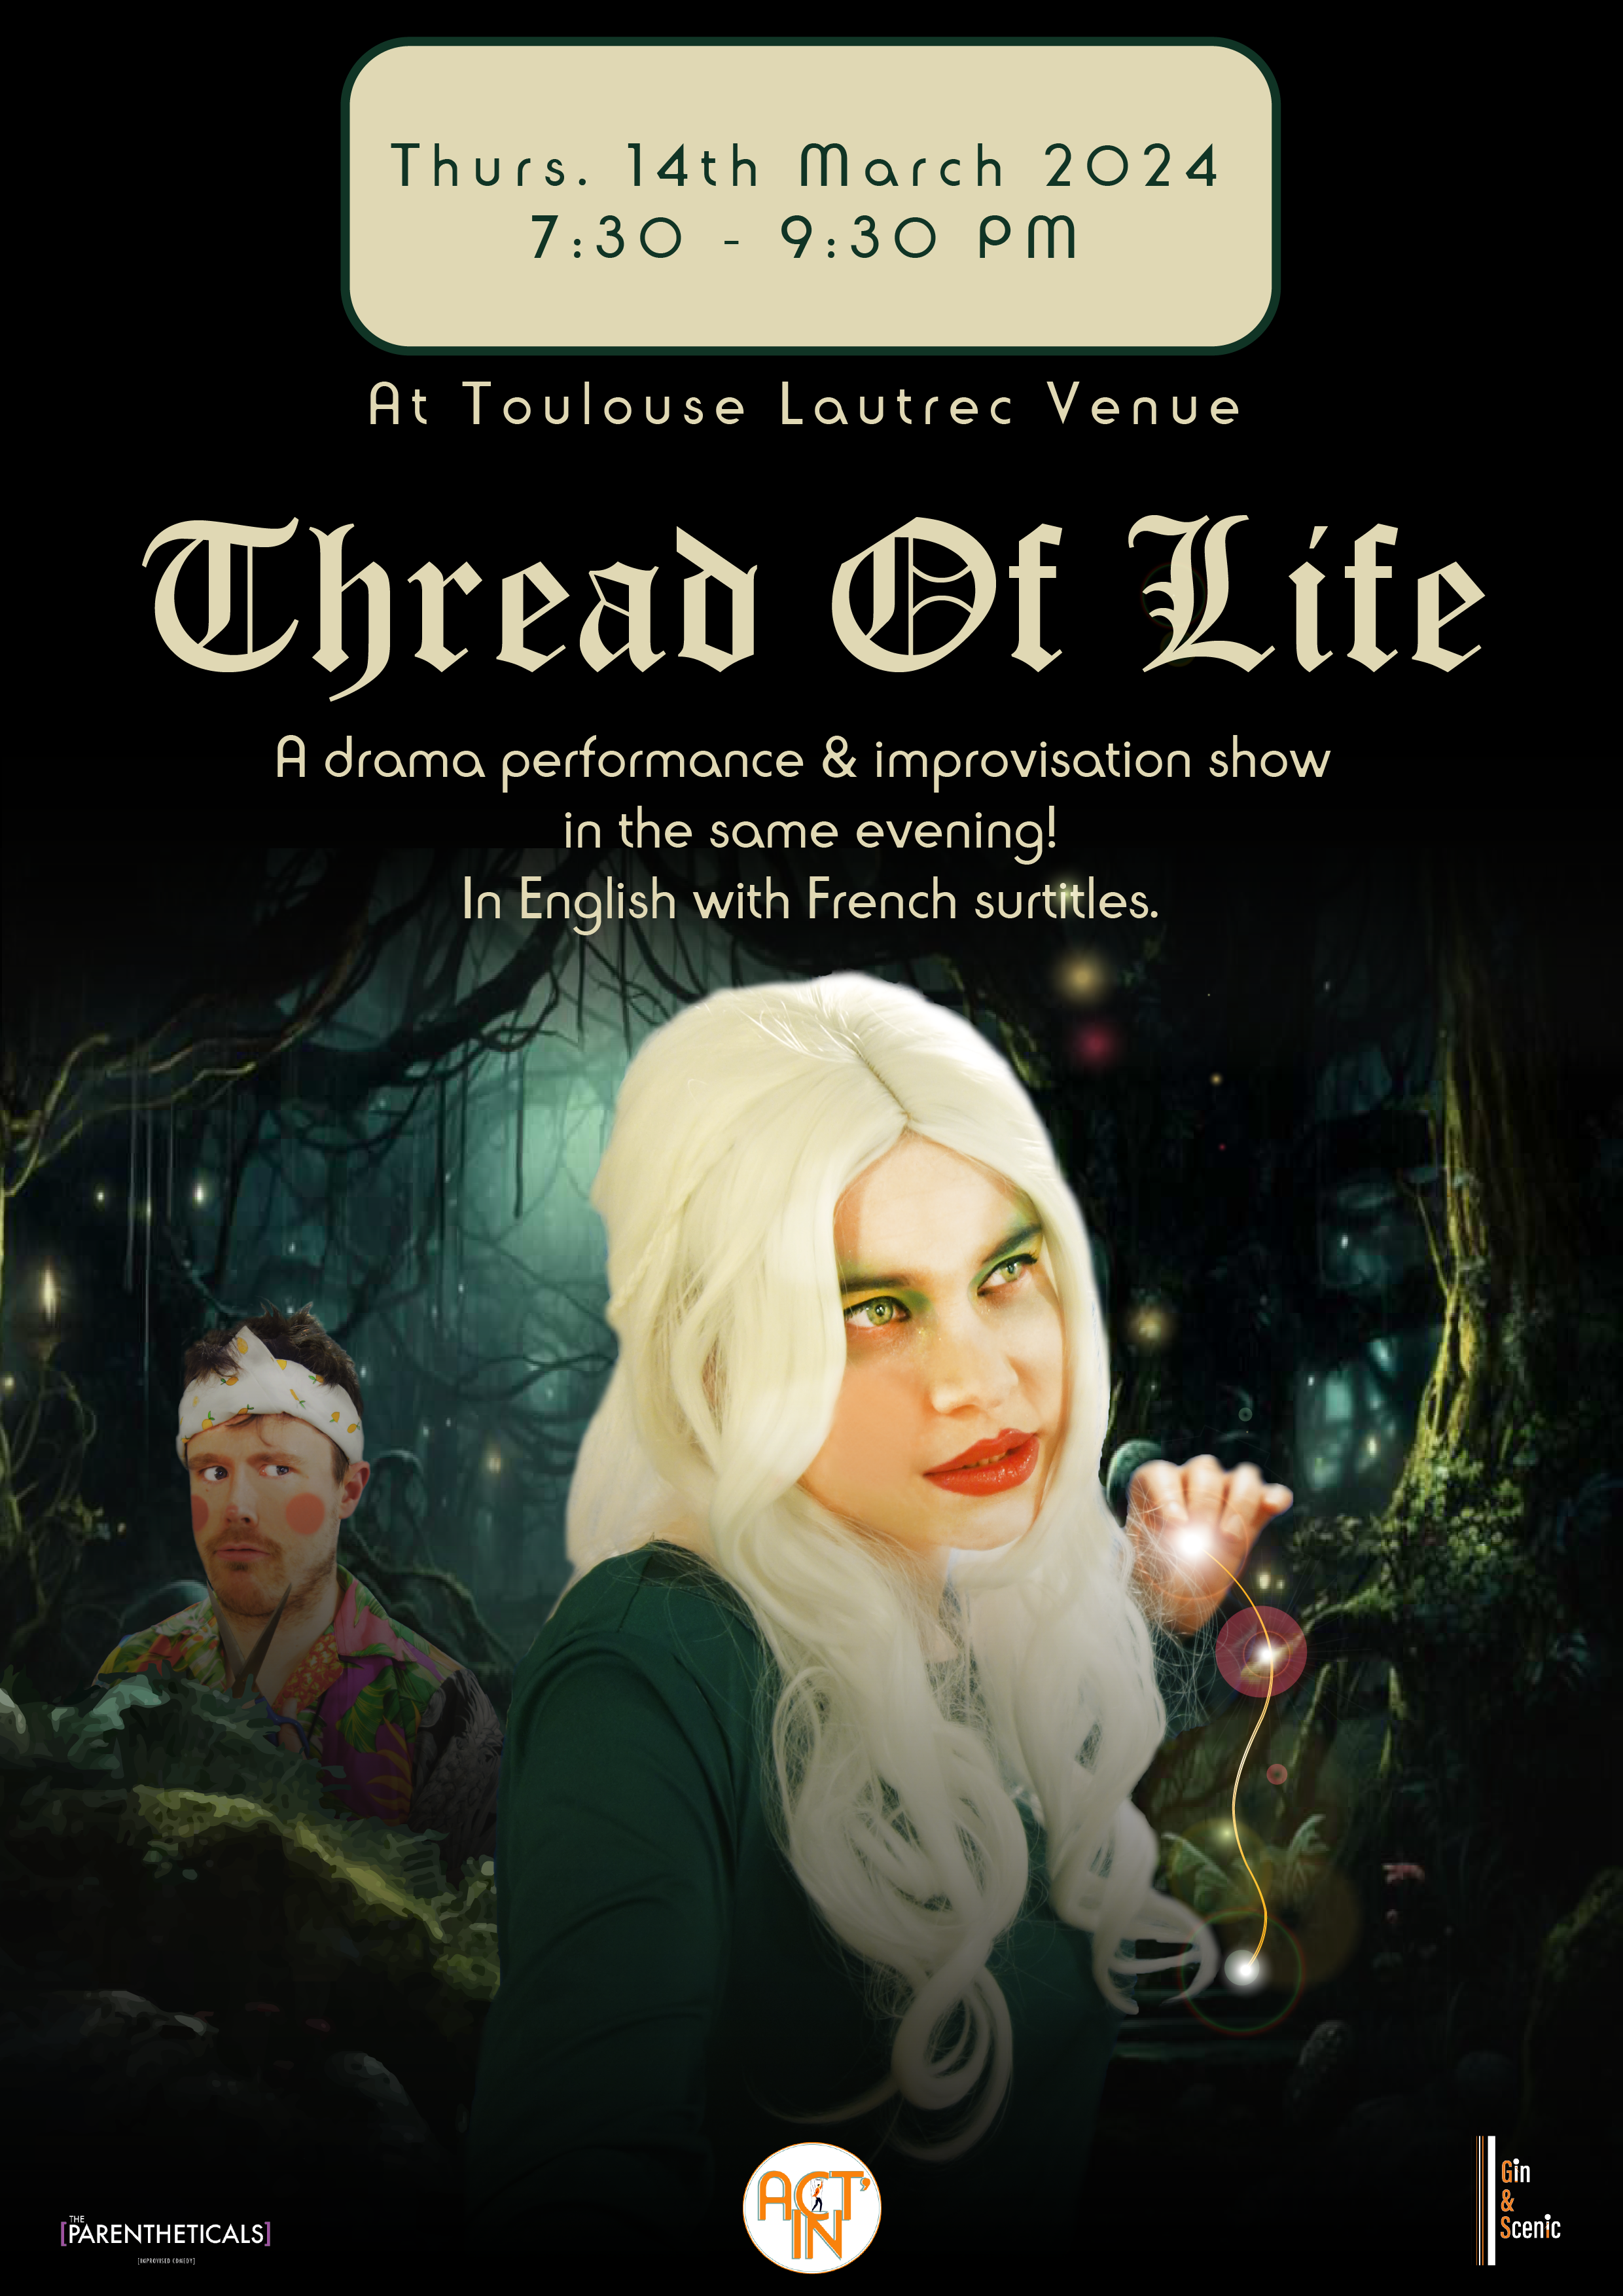 The official poster for the show Thread of Life. Lachesis (Léa) is in the middle holding a thread, with white hair, make-up and a whimsical look. A forest in the background. Athropos (Alex) is further to the left, side-eyeing at Lachesis